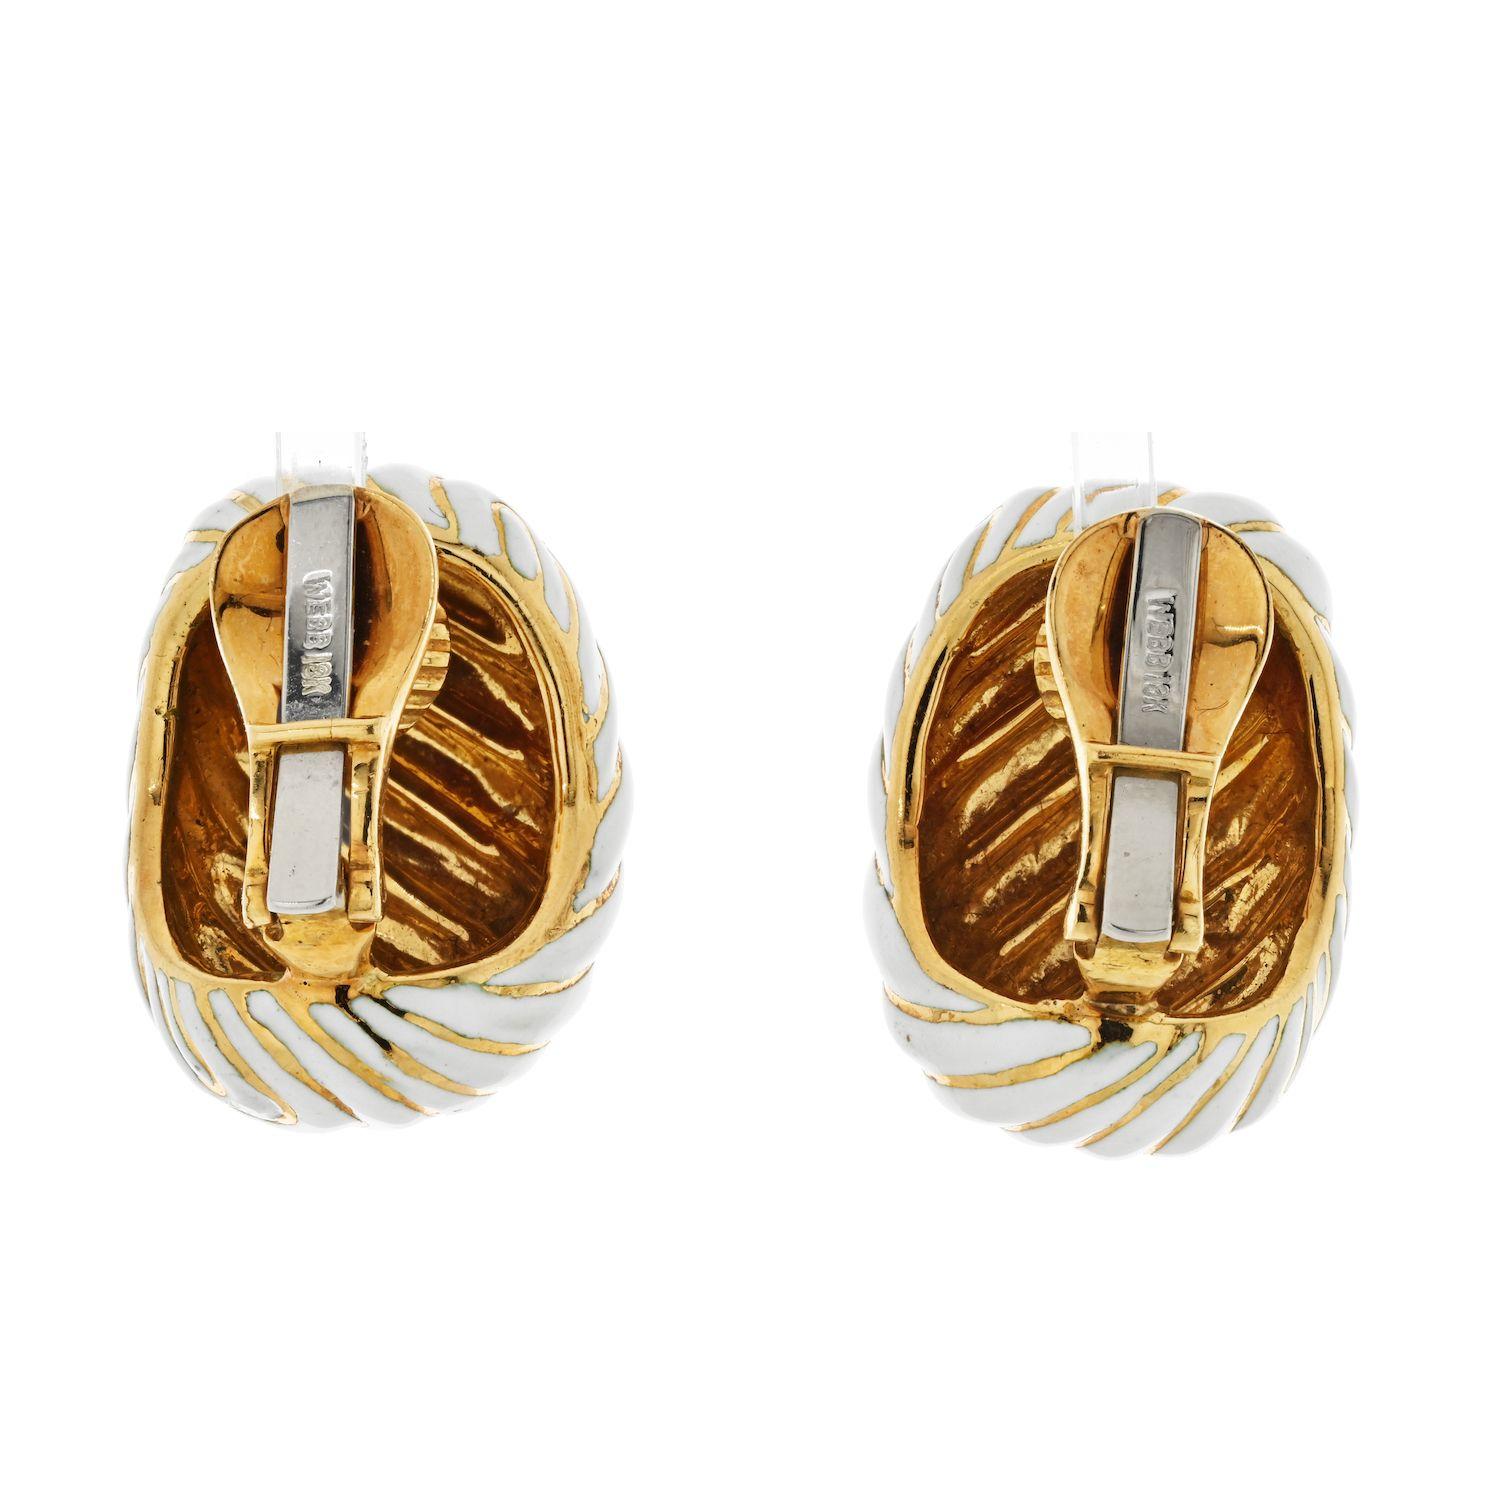 Beautiful American classic pair, created in New York City at the jewelry atelier of David Webb during the modernist period, back in the 1970's. These clips-earrings has been carefully crafted with bombe shape, in solid yellow gold of 18 karats with